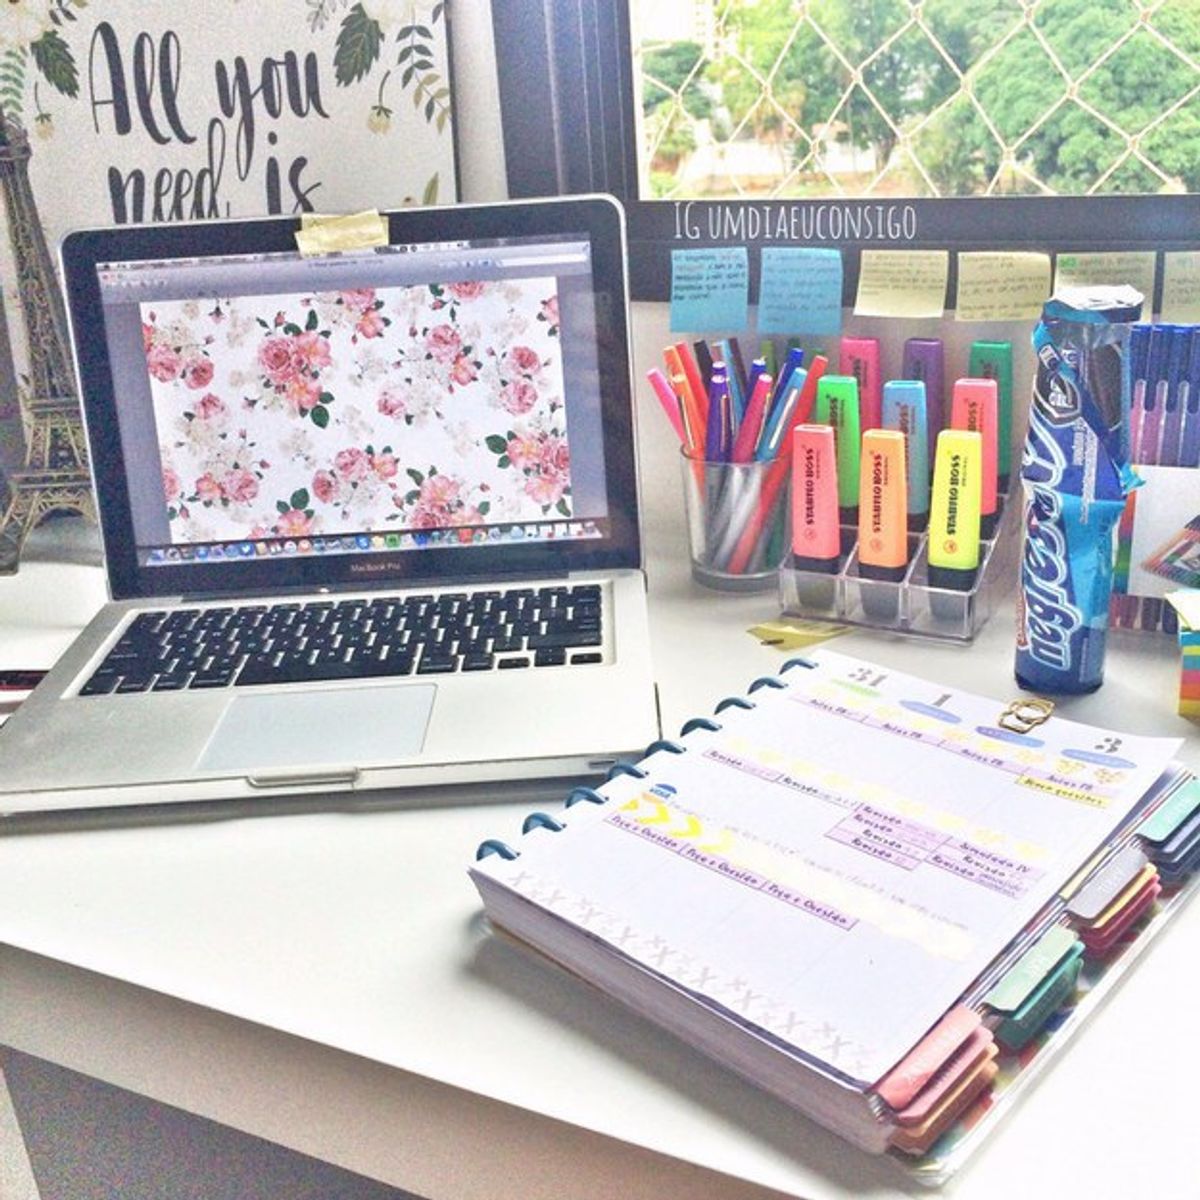 7 Tips For Getting And Staying Organized